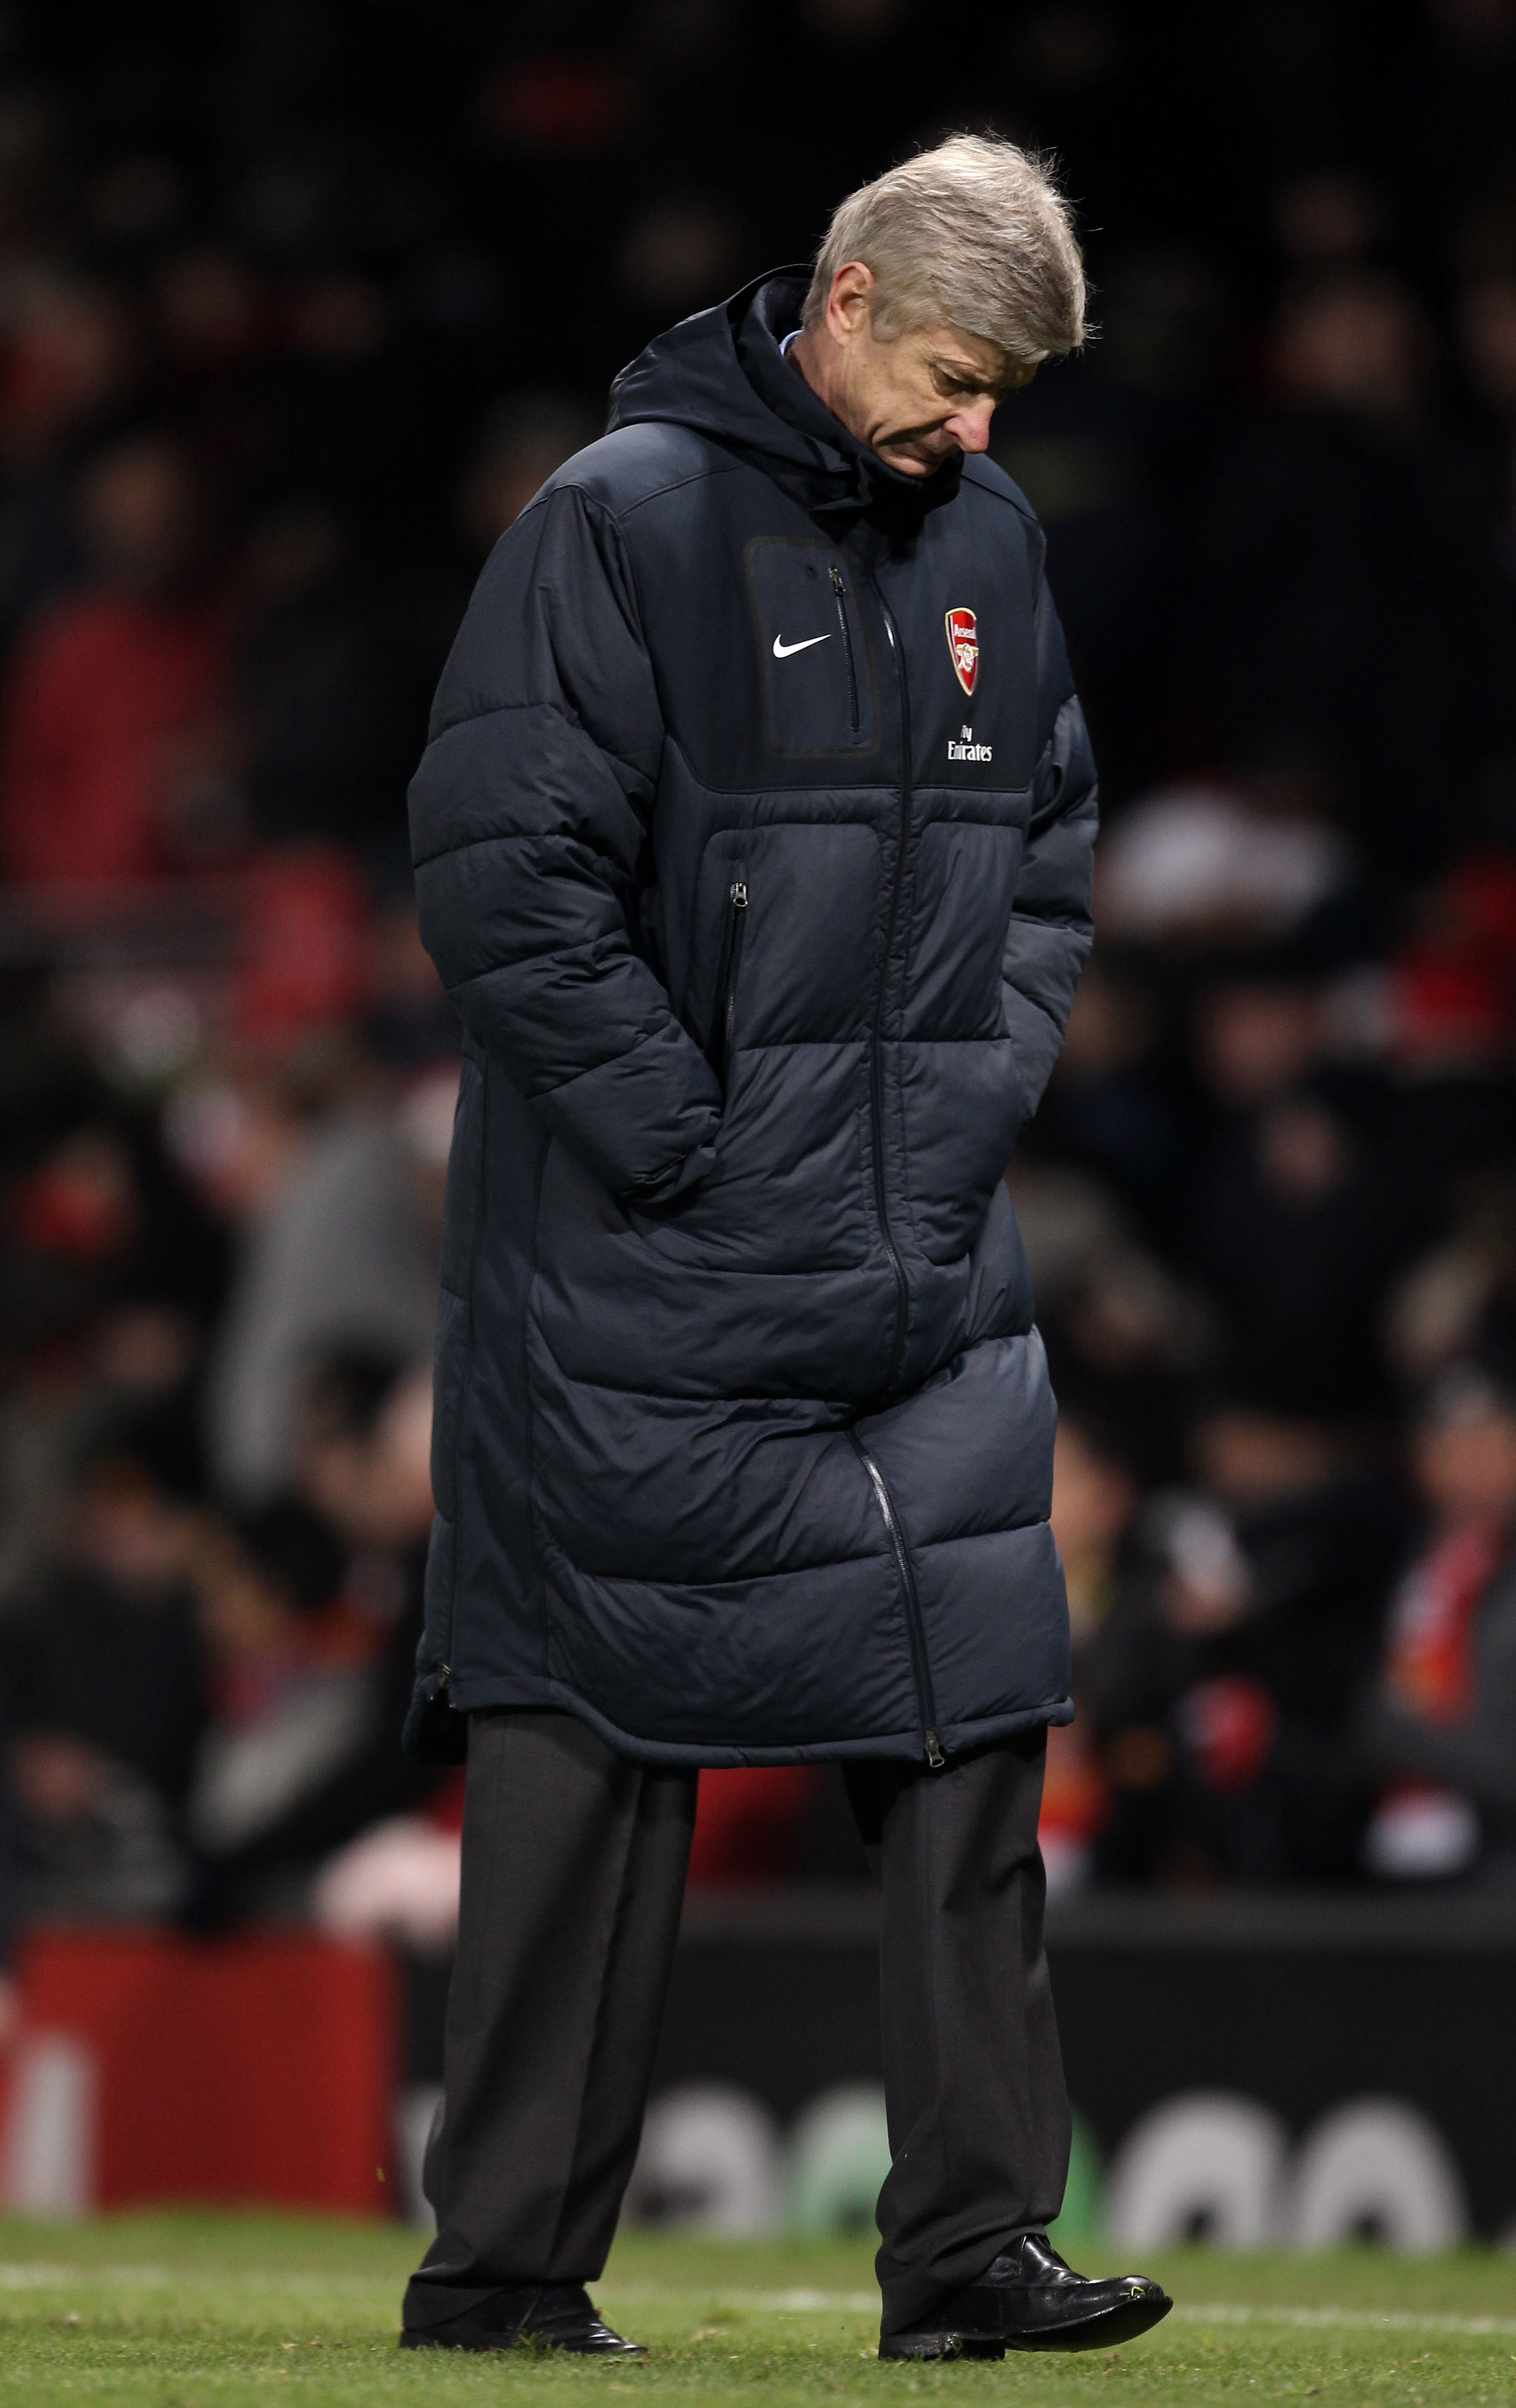 MANCHESTER, ENGLAND - DECEMBER 13:  Arsenal Manager Arsene Wenger heads for the dressing room at the end of the Barclays Premier League match between Manchester United and Arsenal at Old Trafford on December 13, 2010 in Manchester, England.  (Photo by Ale